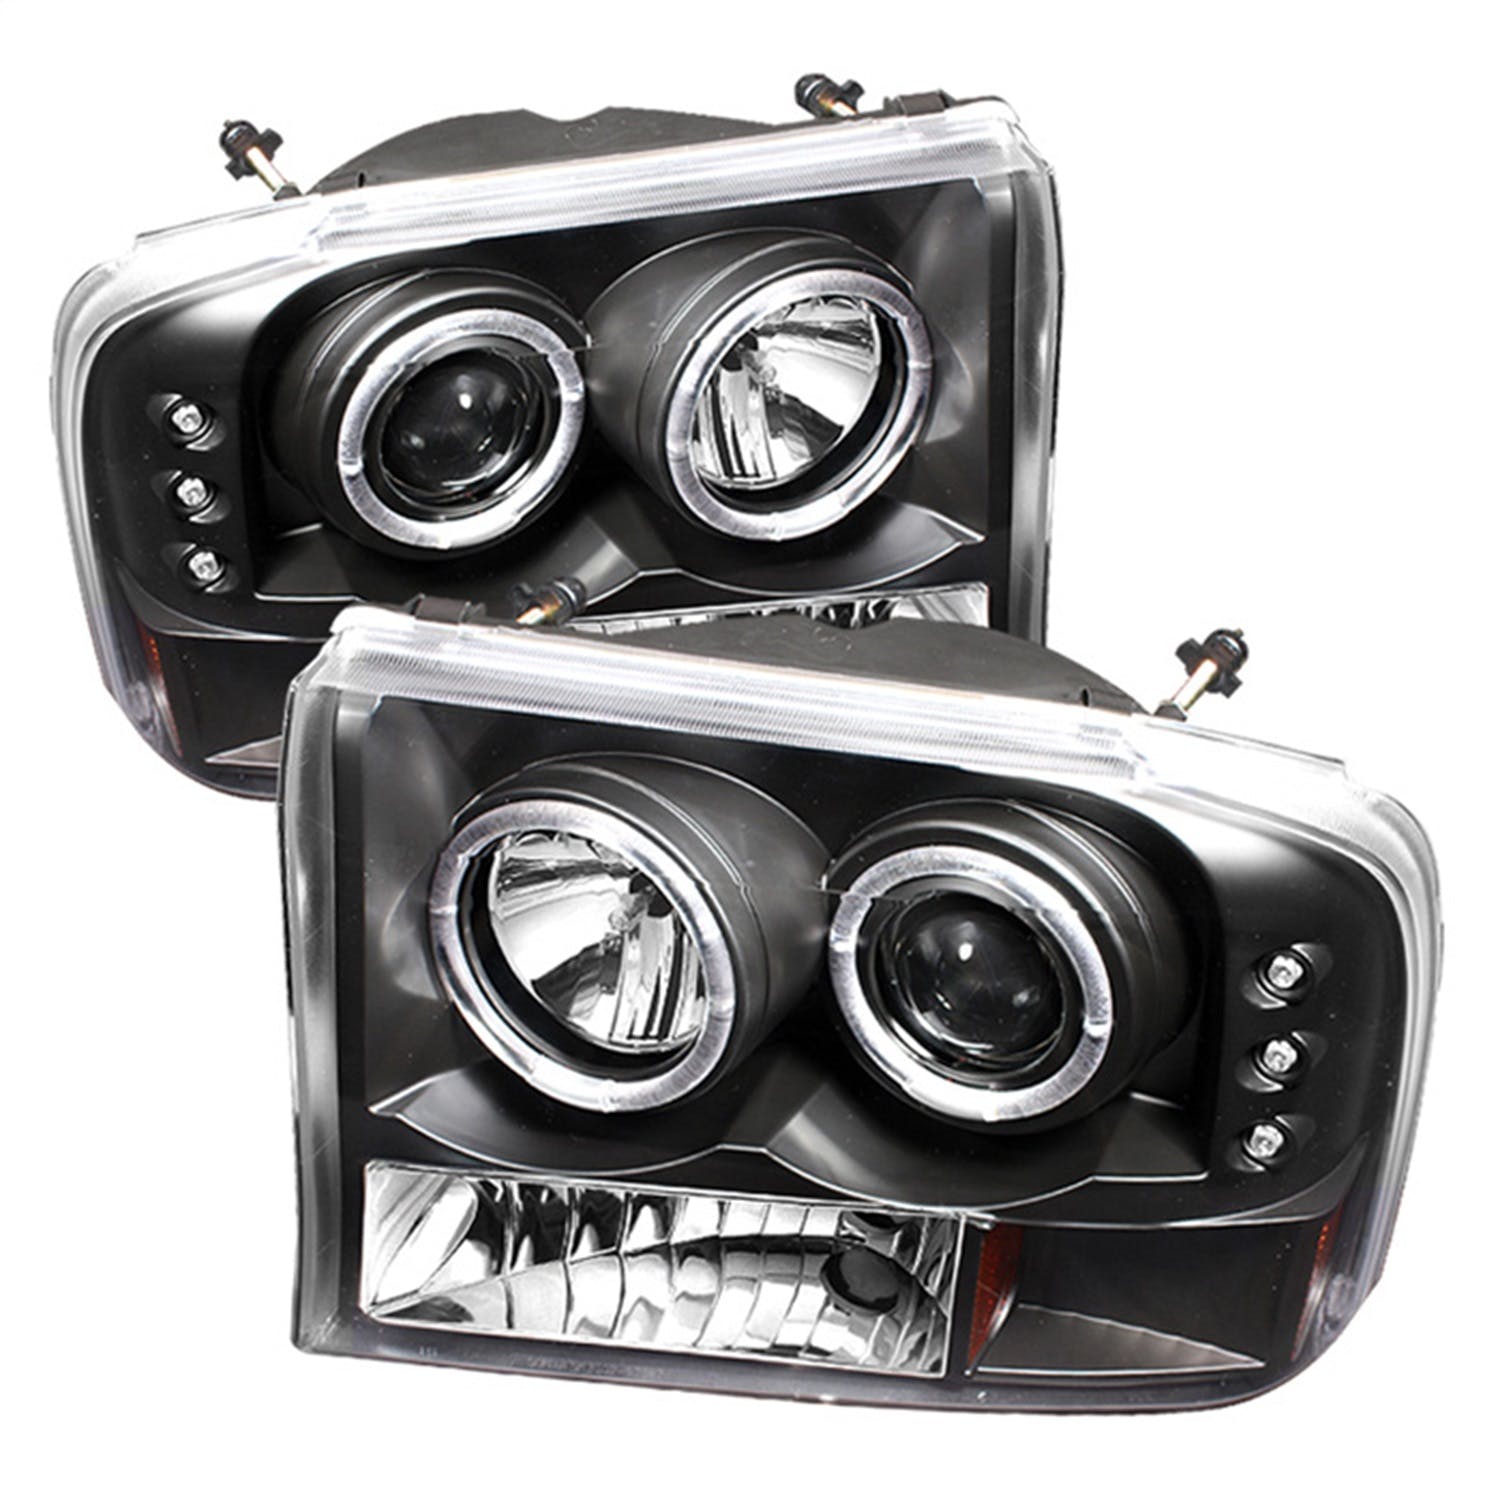 Spyder Auto 5010339 (Spyder) Ford F250 Super Duty 99-04/Ford Excursion 00-04 1PC Projector Headlight